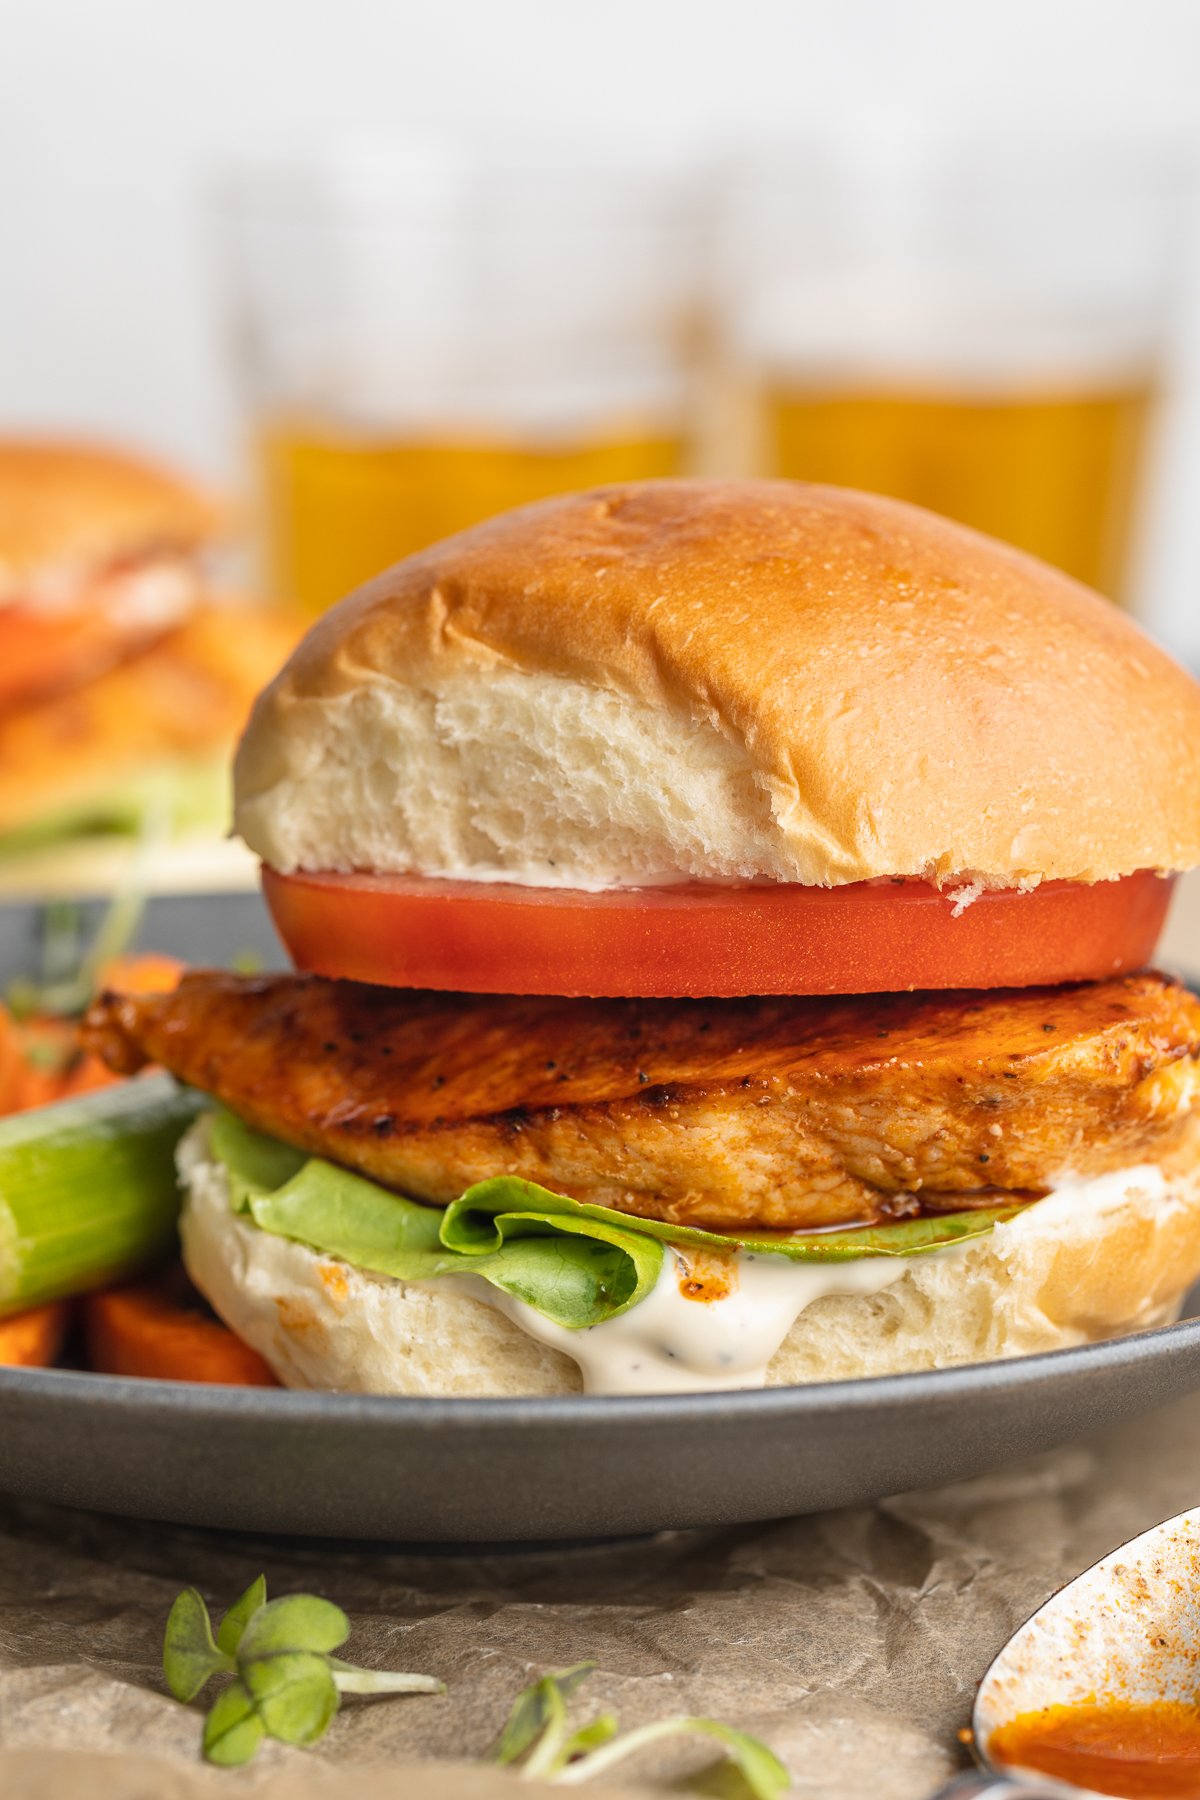 Side view of a buffalo chicken sandwich with an orange-colored grilled chicken breast, a thick slice of tomato, green lettuce, and a fluffy bun on a blue-grey plate.